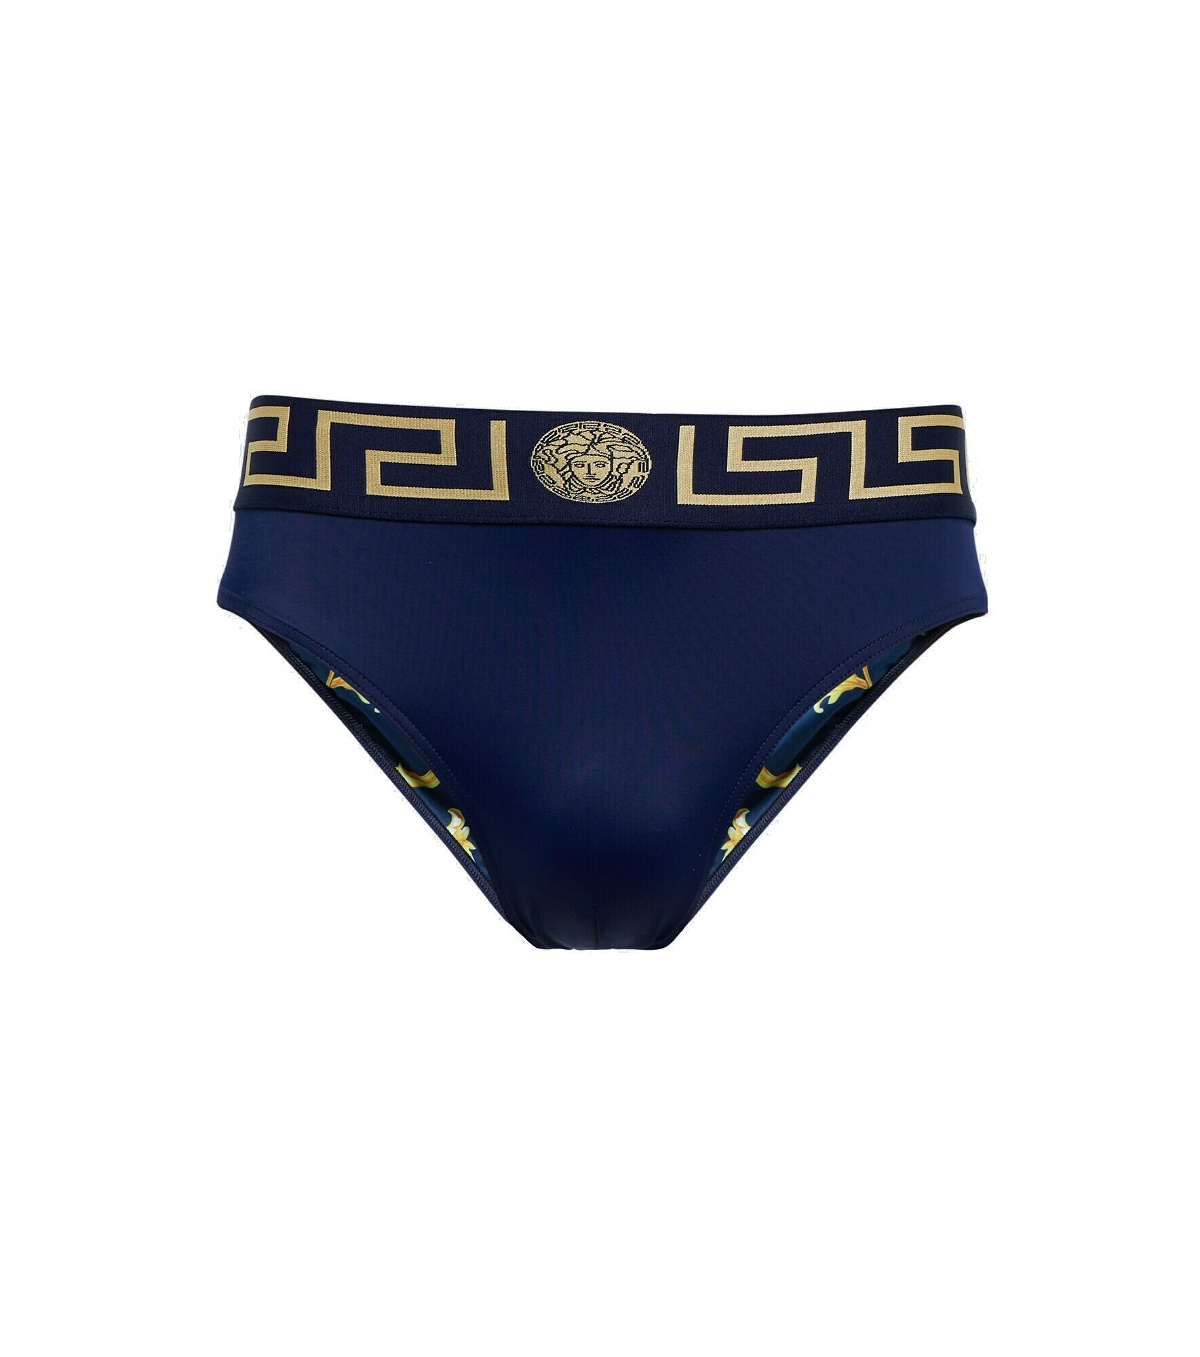 Pack of Two Greca Border Boxer Briefs in Black And White Versace